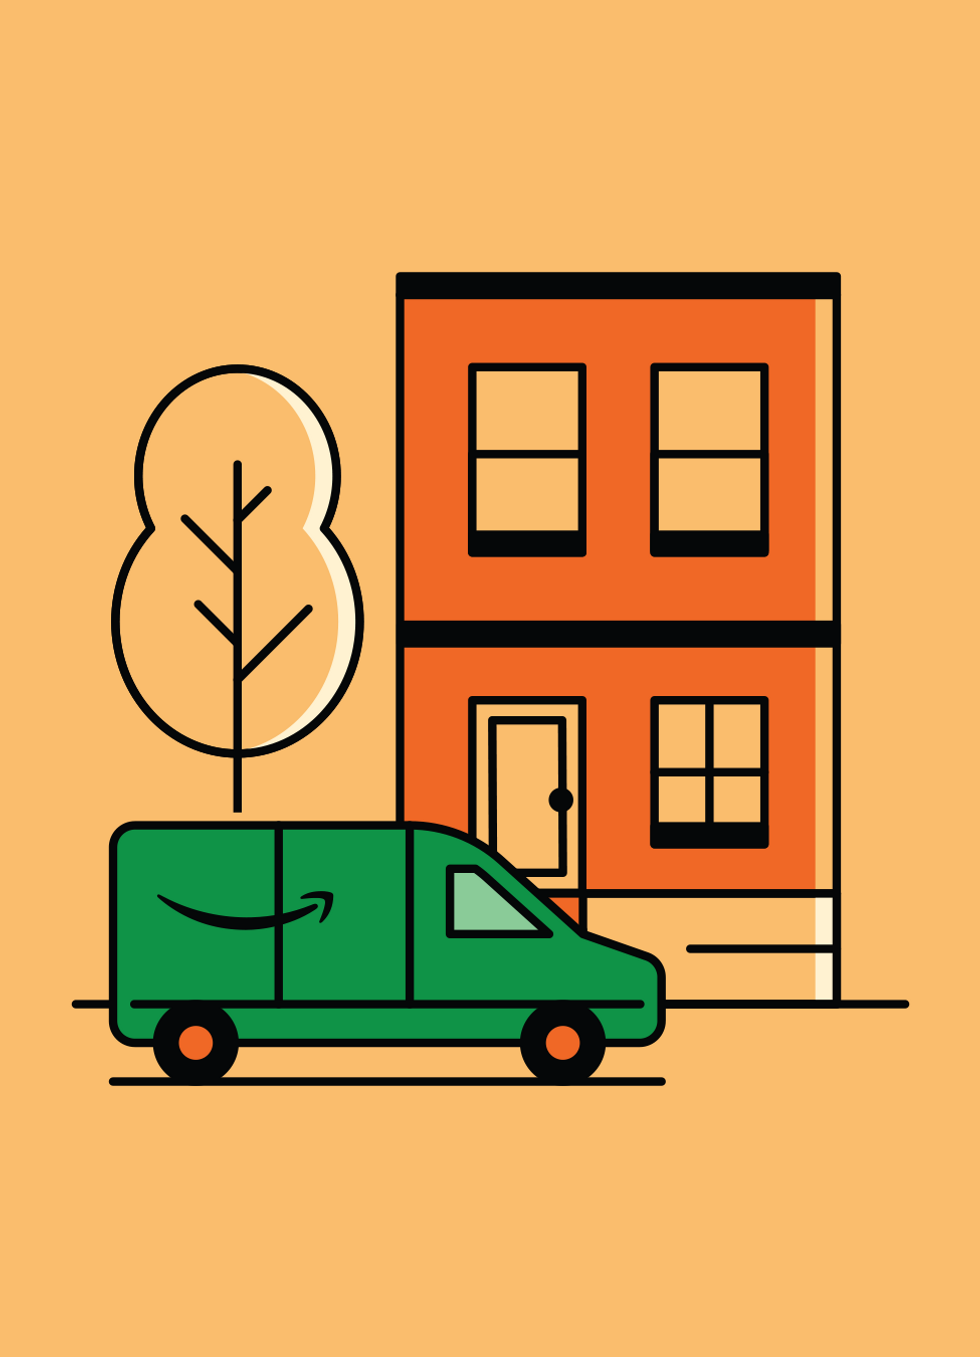 An illustration of an Amazon van in front of a building.